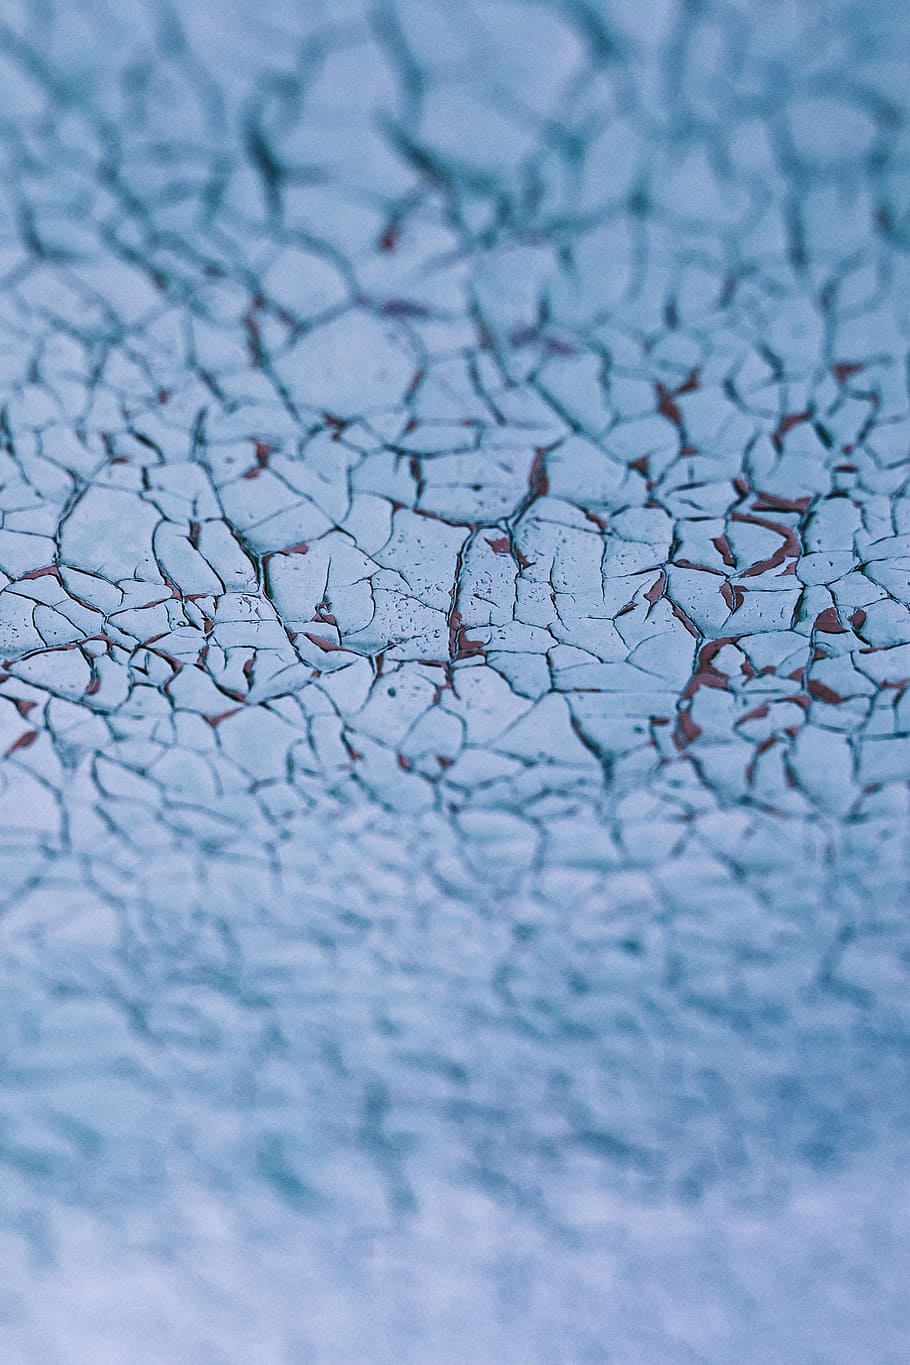 cracked paint, Cracked, paint, abstract, background, blue, drought, backgrounds, land, nature